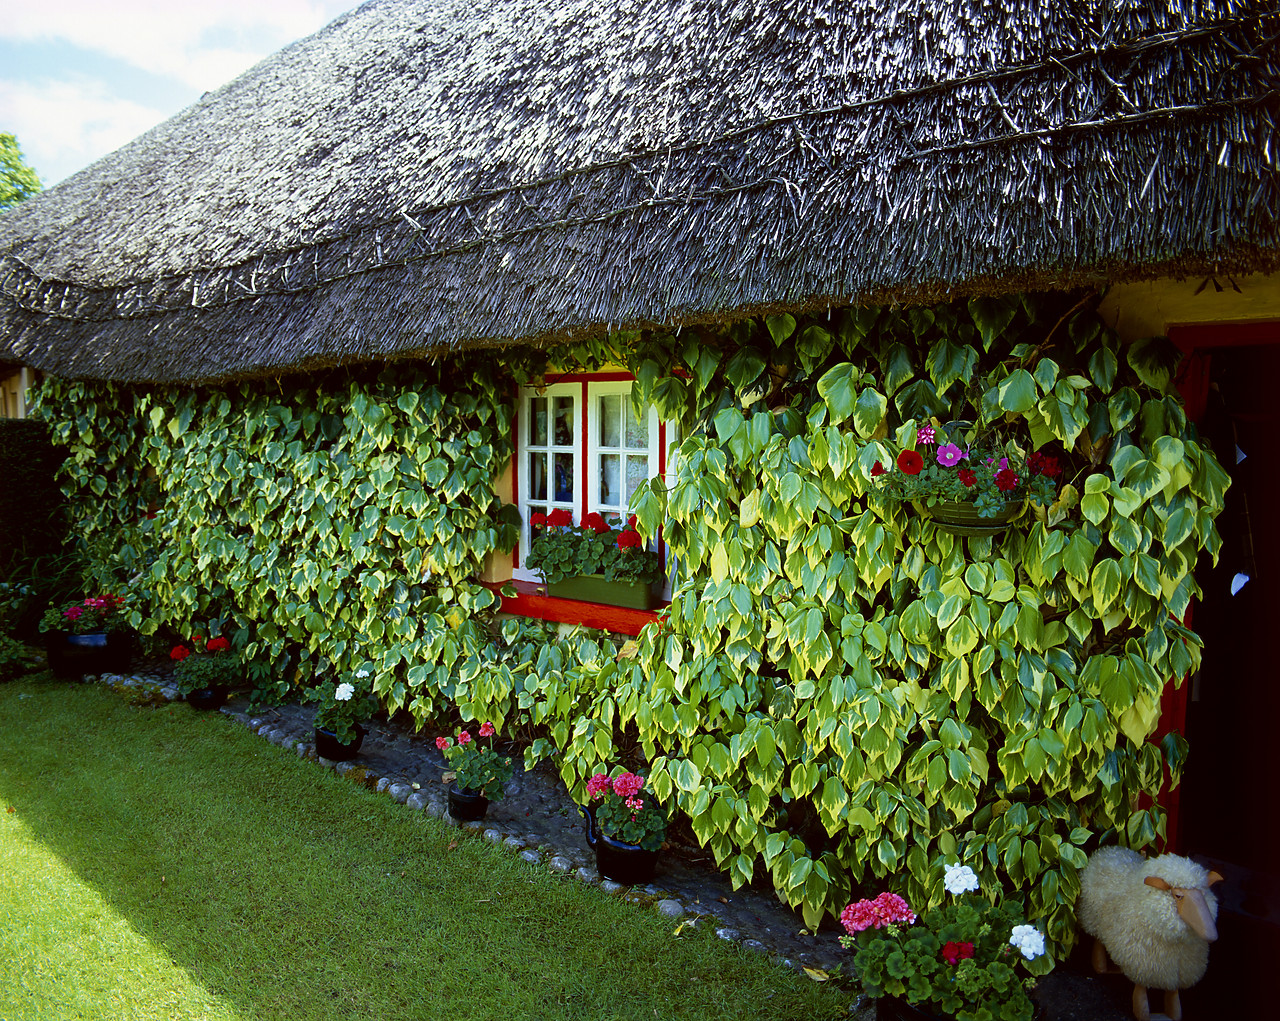 #030242-2 - Ivy Covered Thatch Cottage, Adare, County Limerick, Ireland